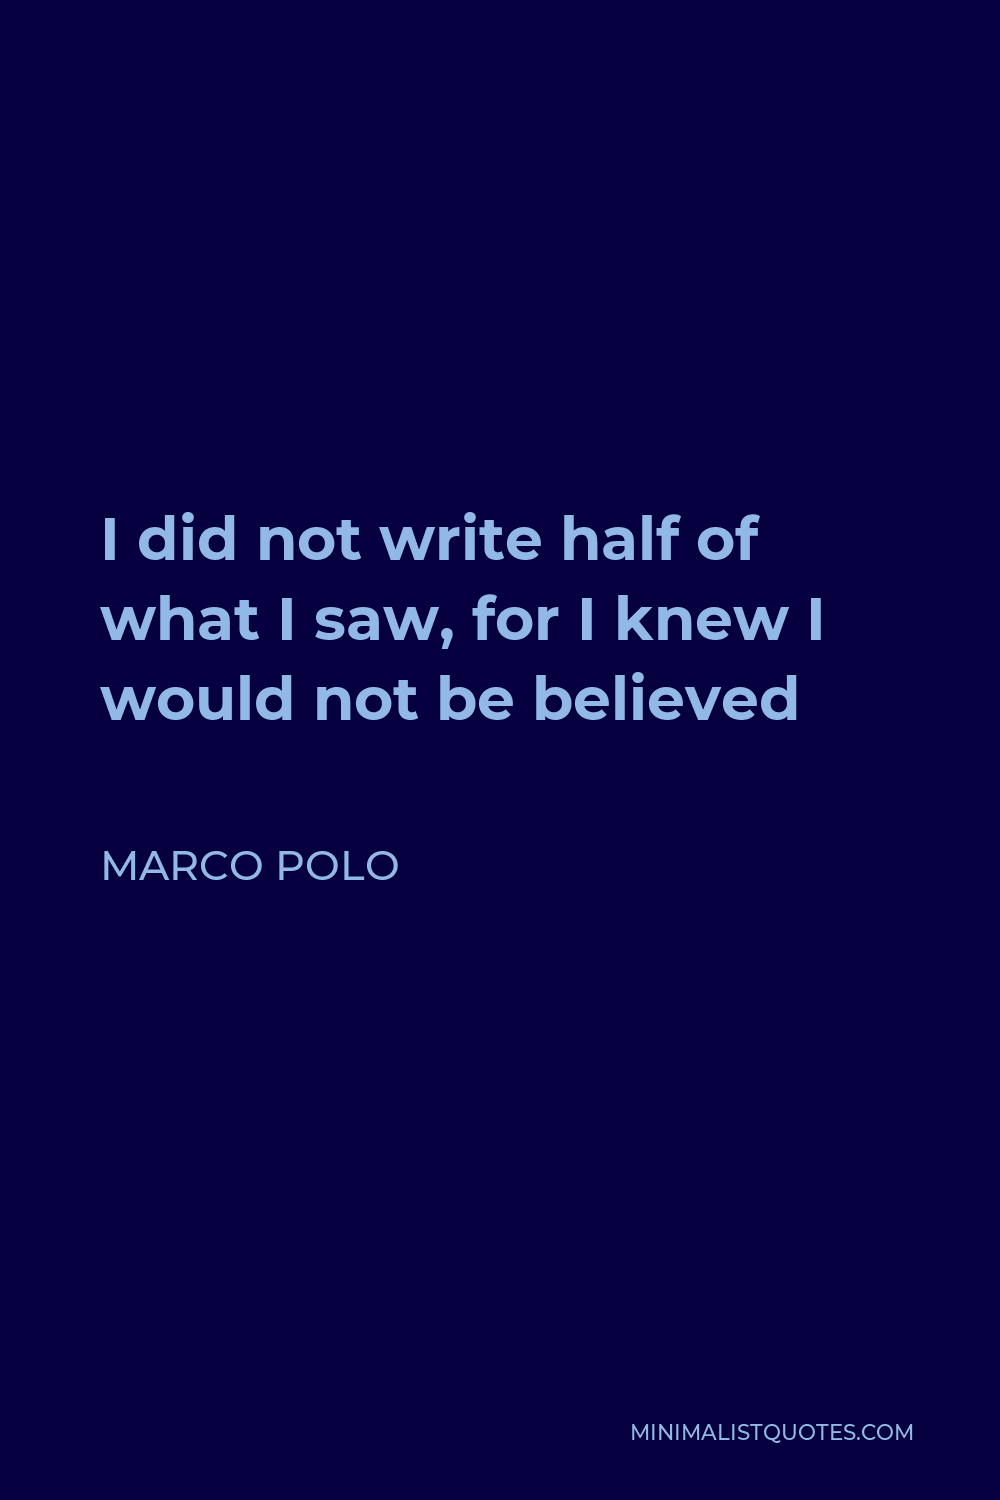 Marco Polo Quote - I did not write half of what I saw, for I knew I would not be believed